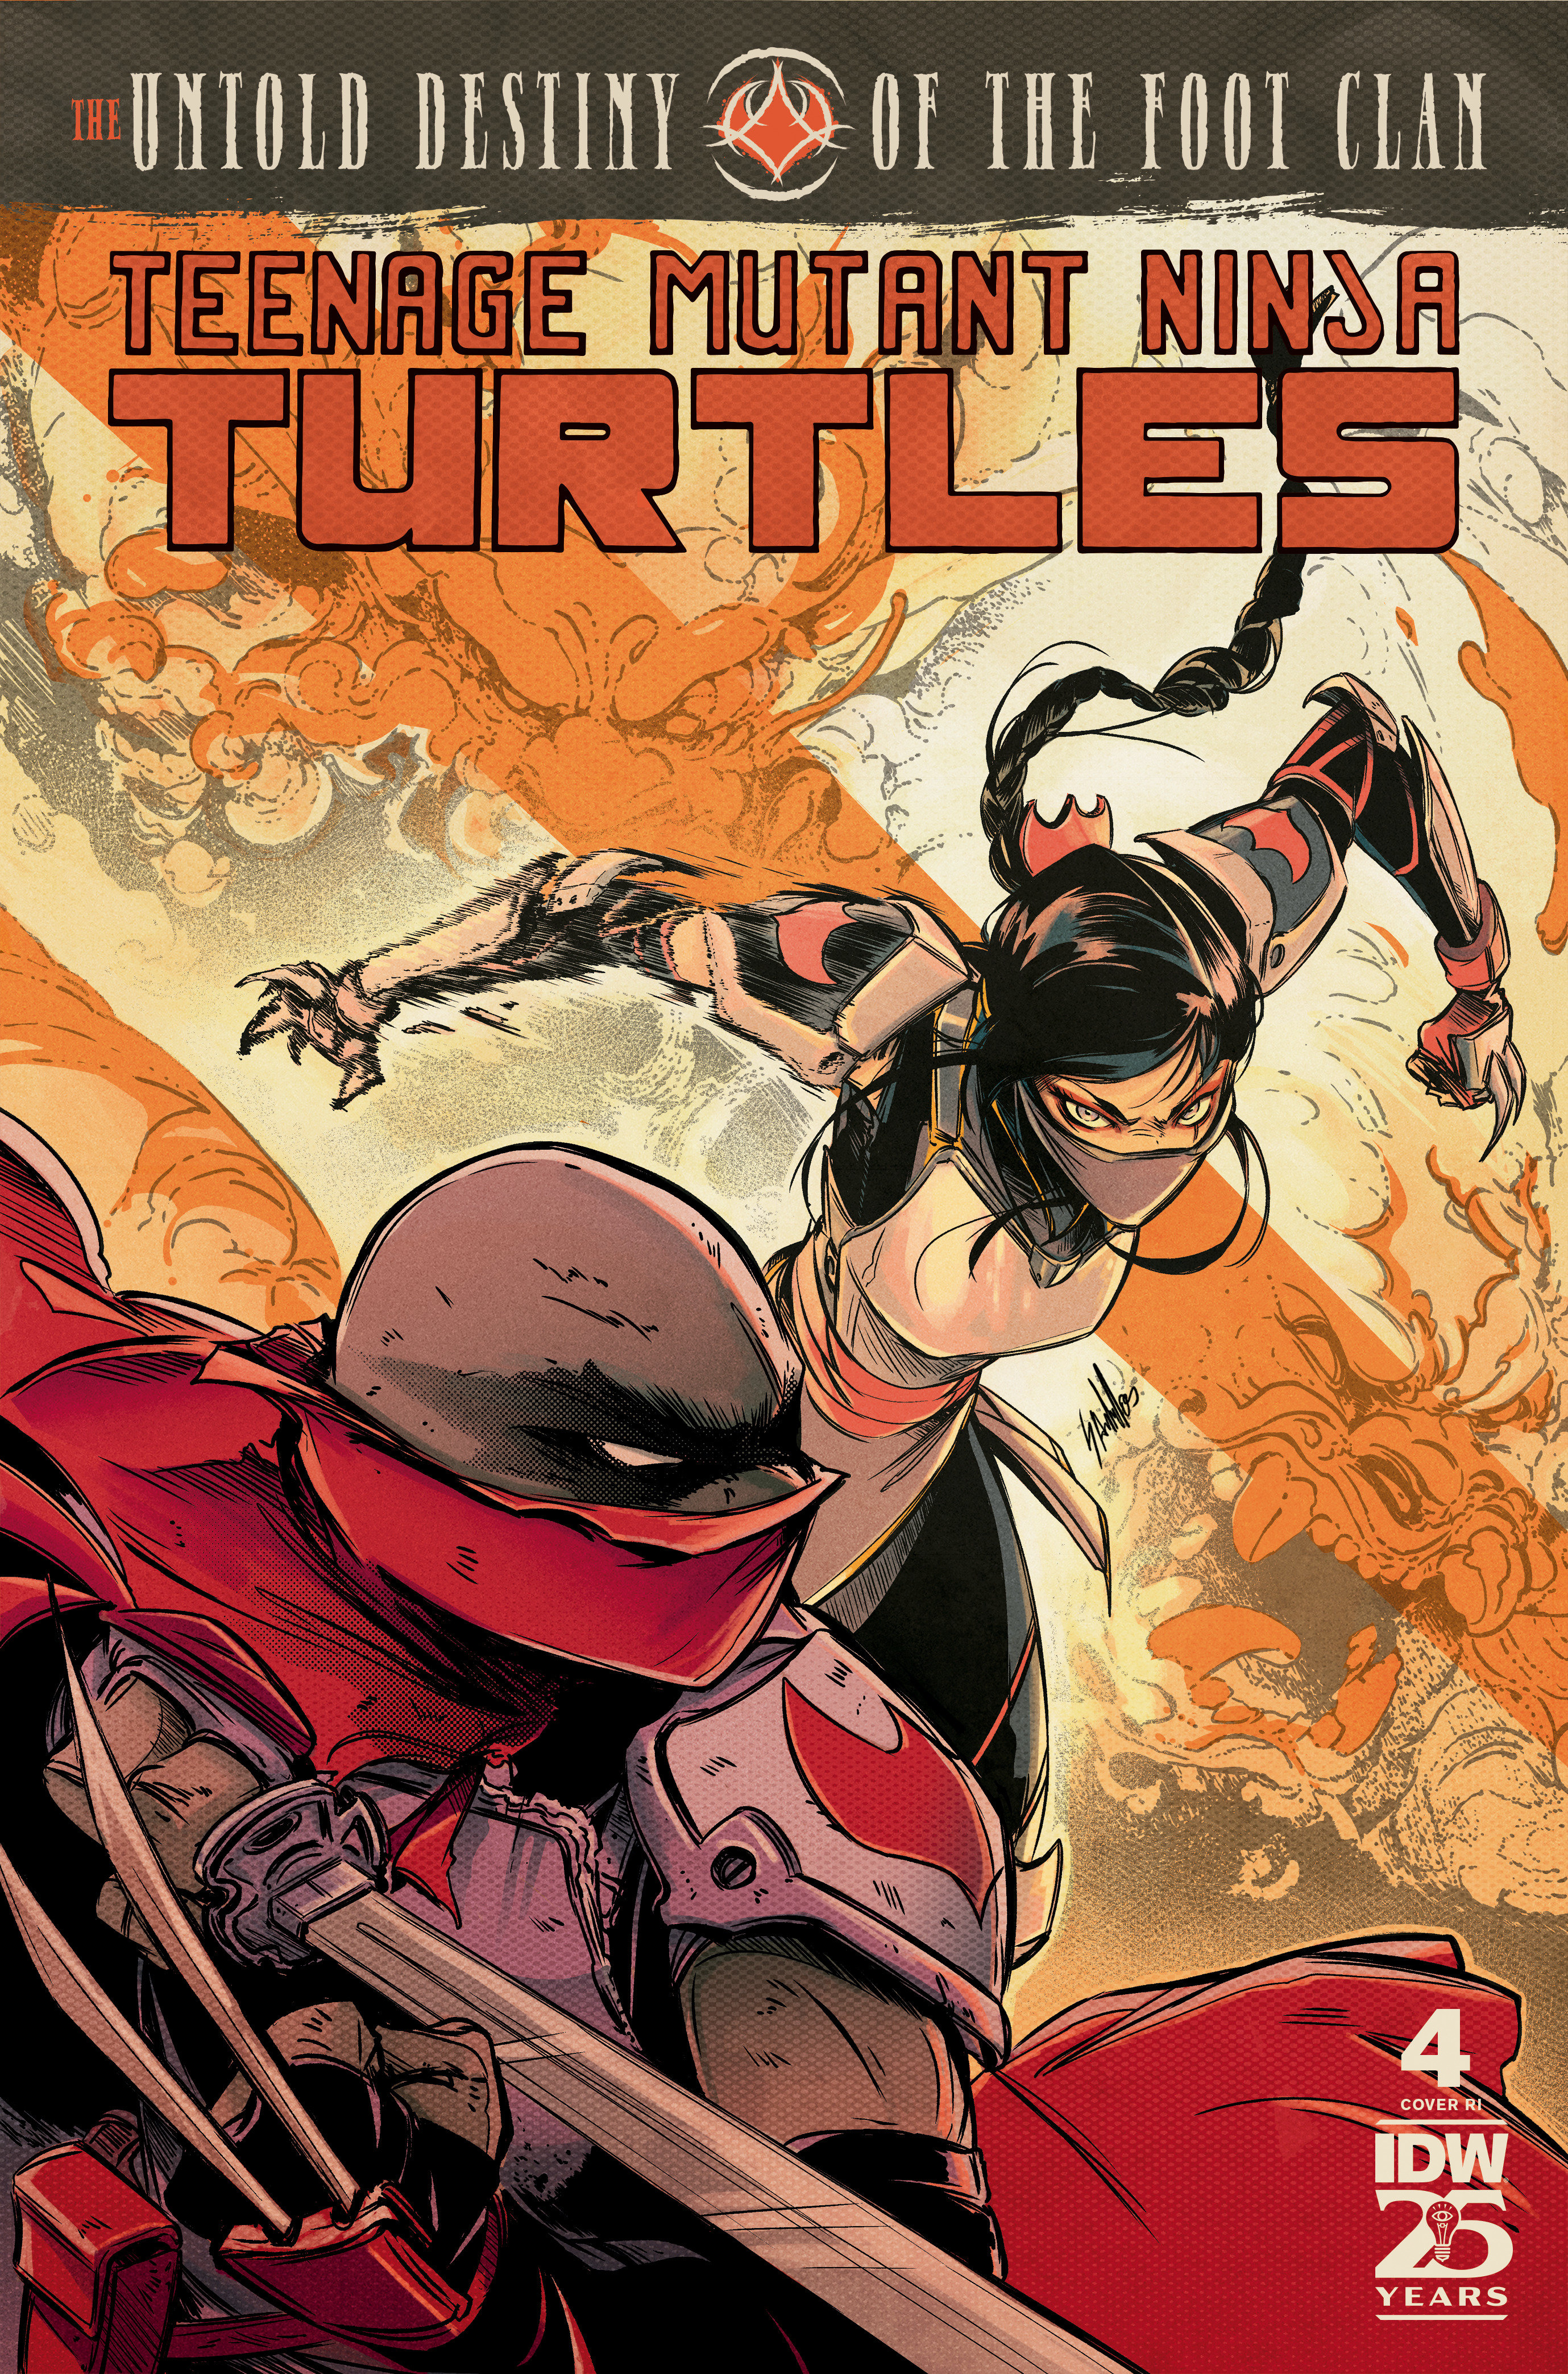 Teenage Mutant Ninja Turtles: The Untold Destiny of the Foot Clan #4 Cover Santtos 1 for 10 Incentive Variant